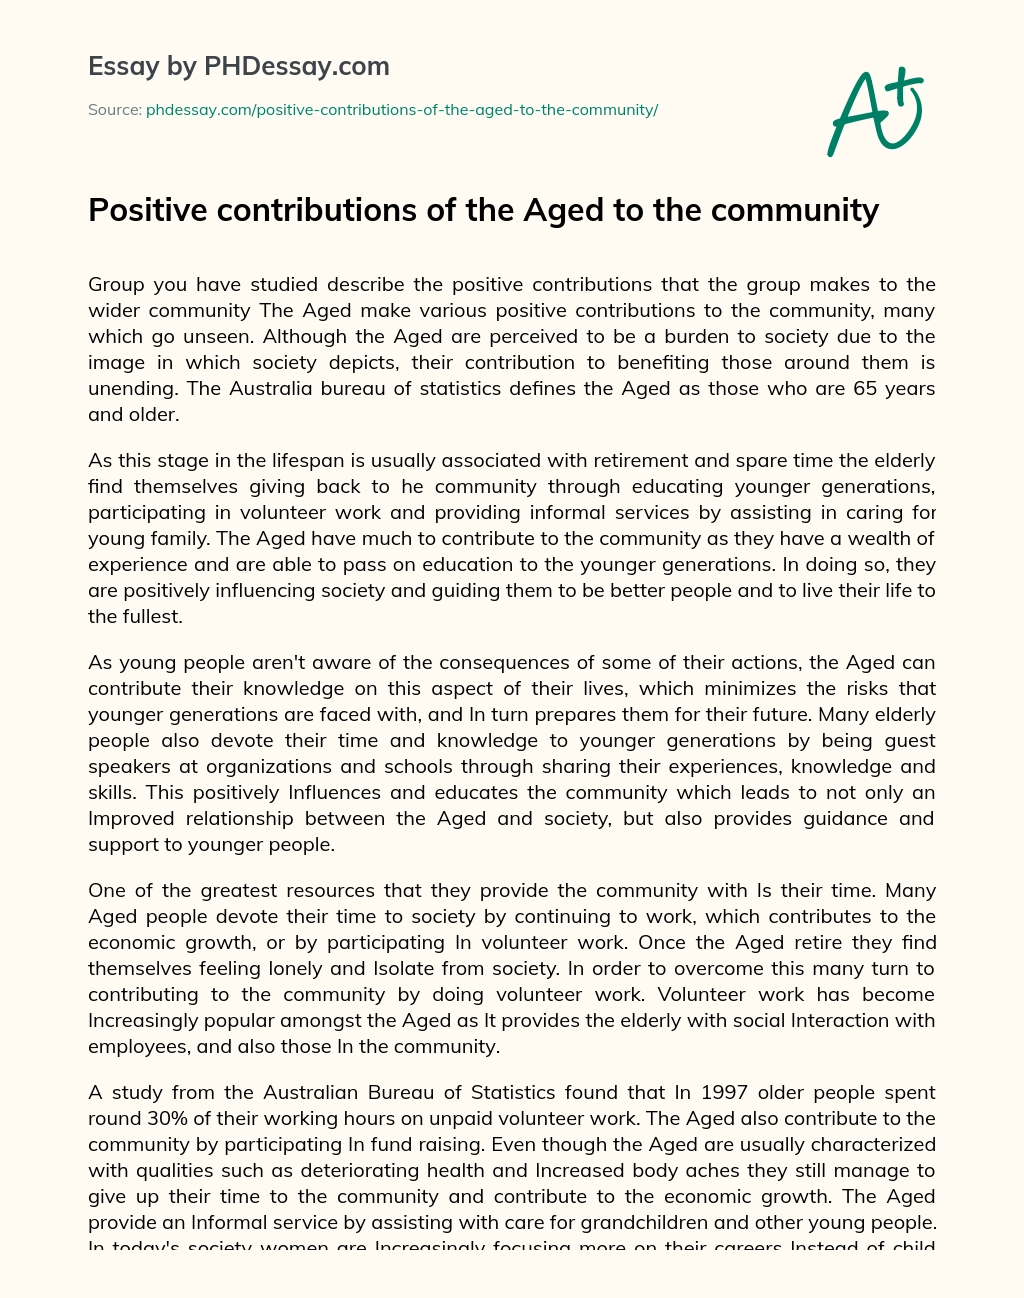 Positive contributions of the Aged to the community essay